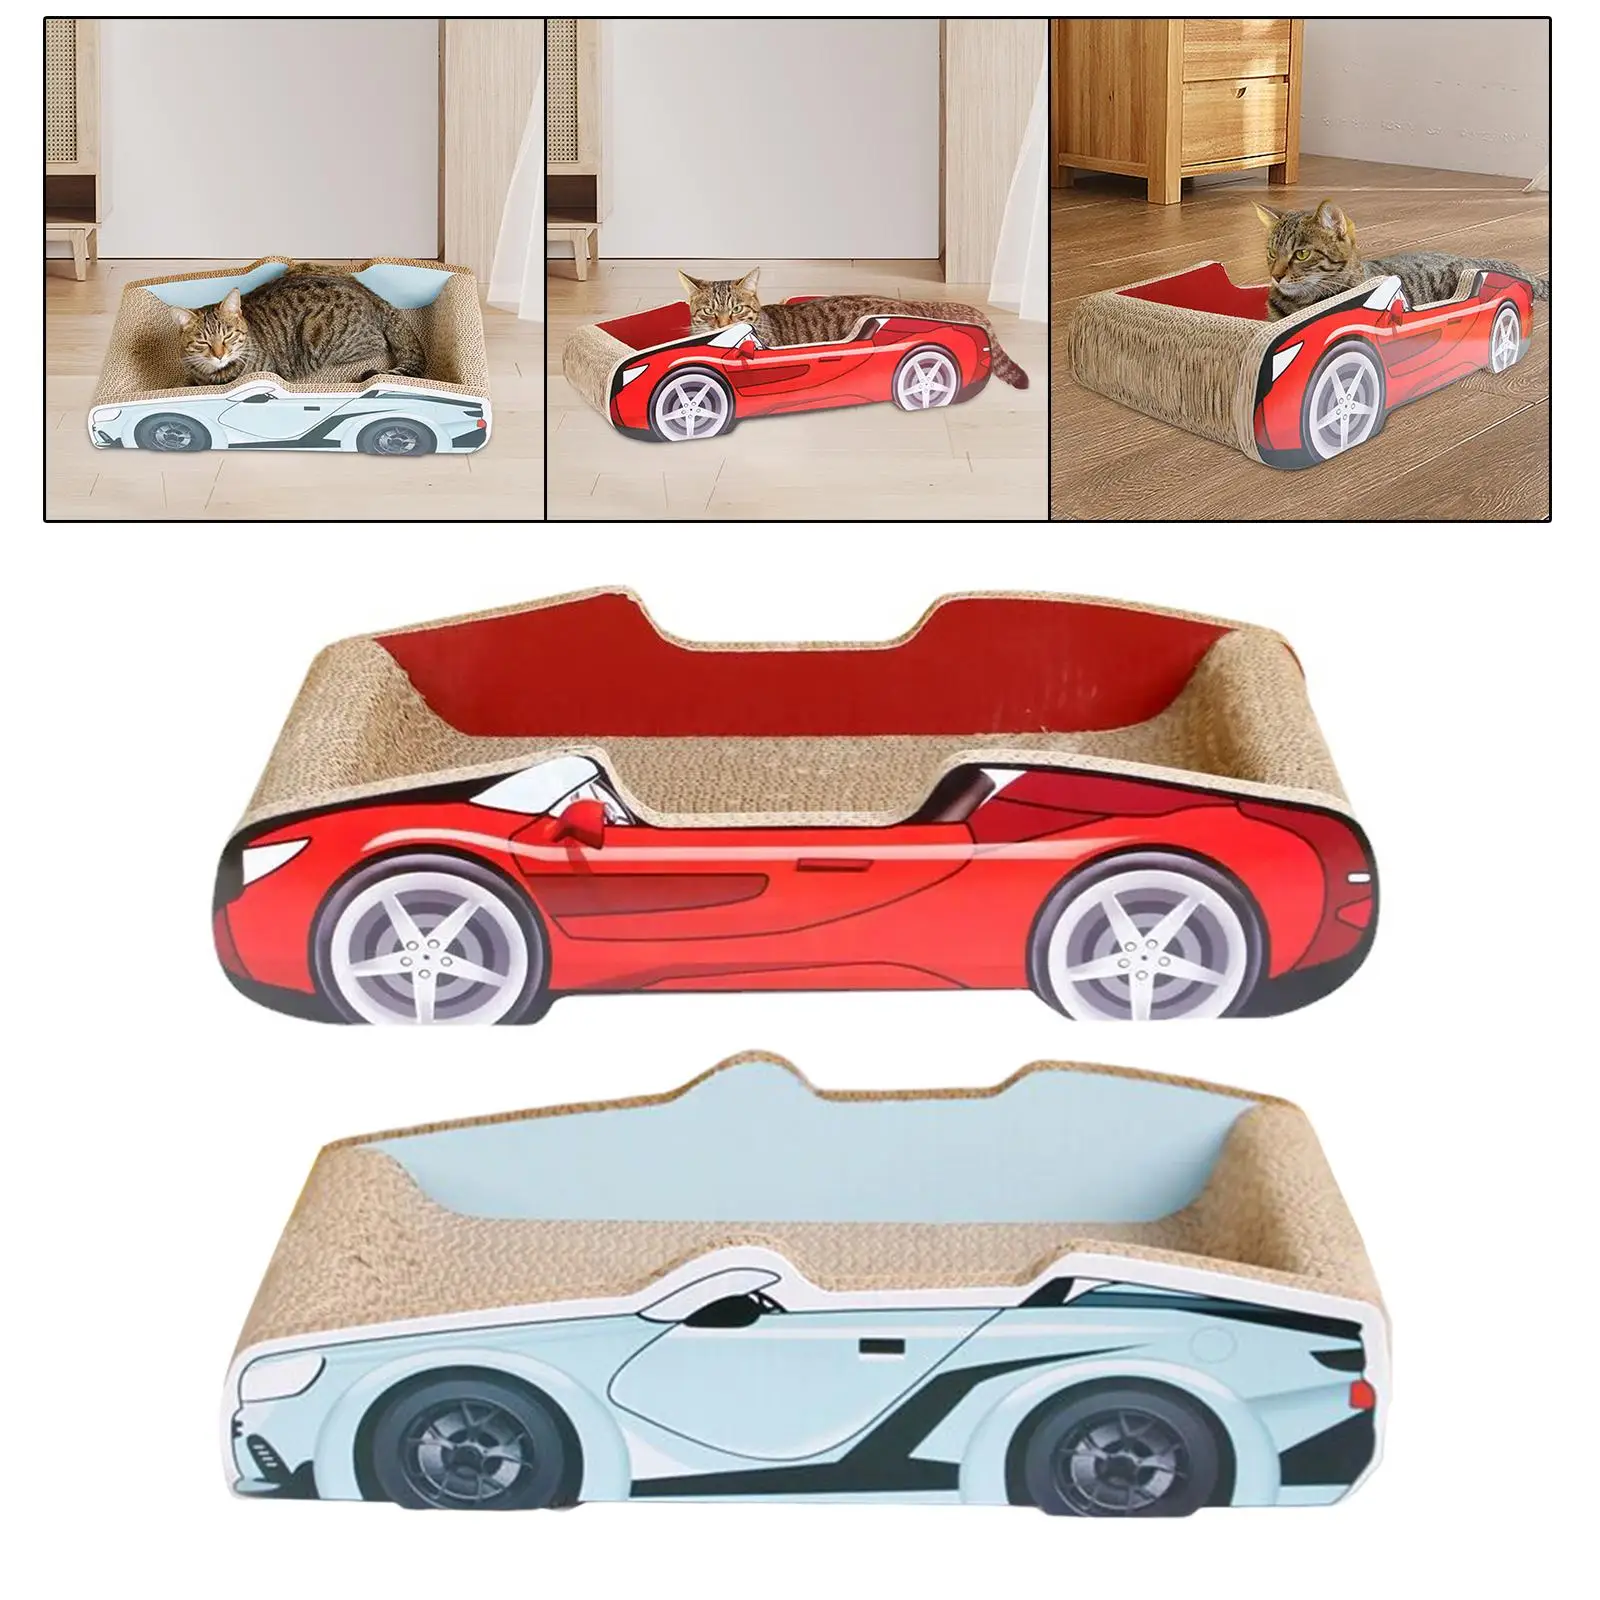 Cat Scratching Corrugated Board Pet Cushion Protect Carpets and Sofas House Claw Grinder Kitten Durable Cat Scratch Bed